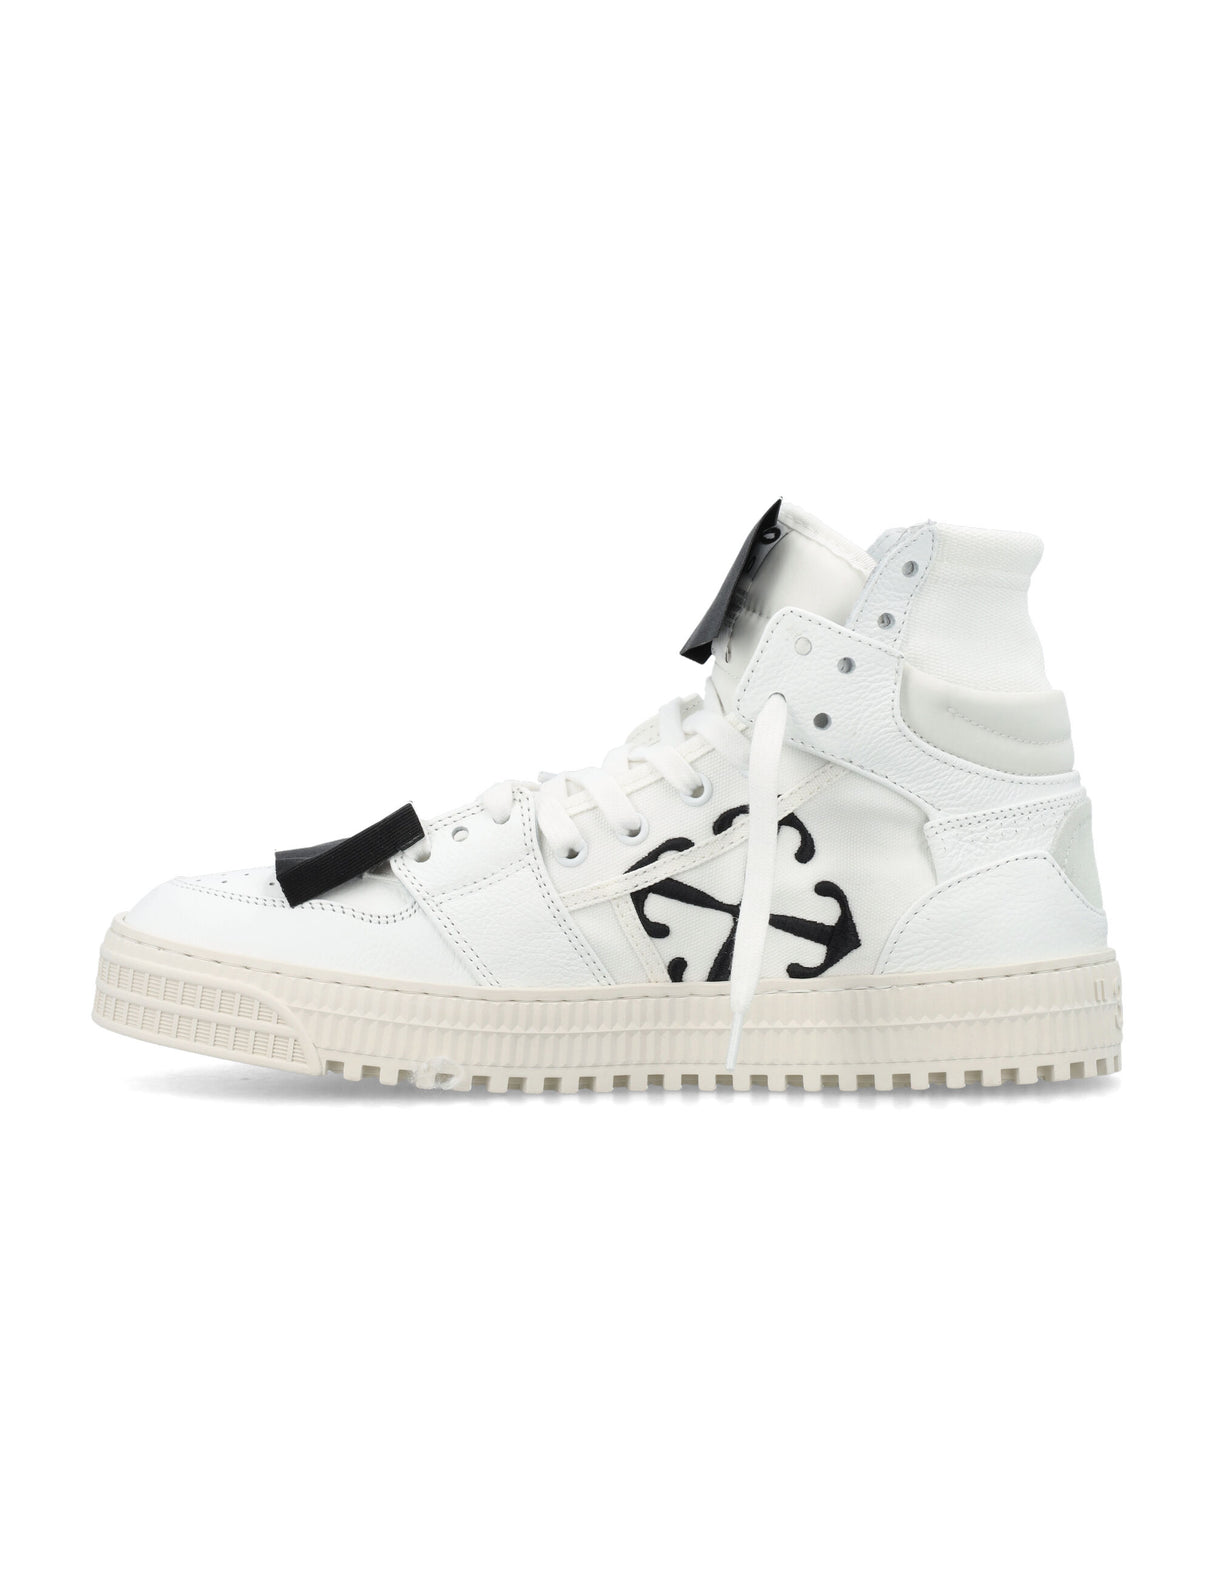 3.0 OFF COURT LEATHER HIGH-TOP Sneakers for Women